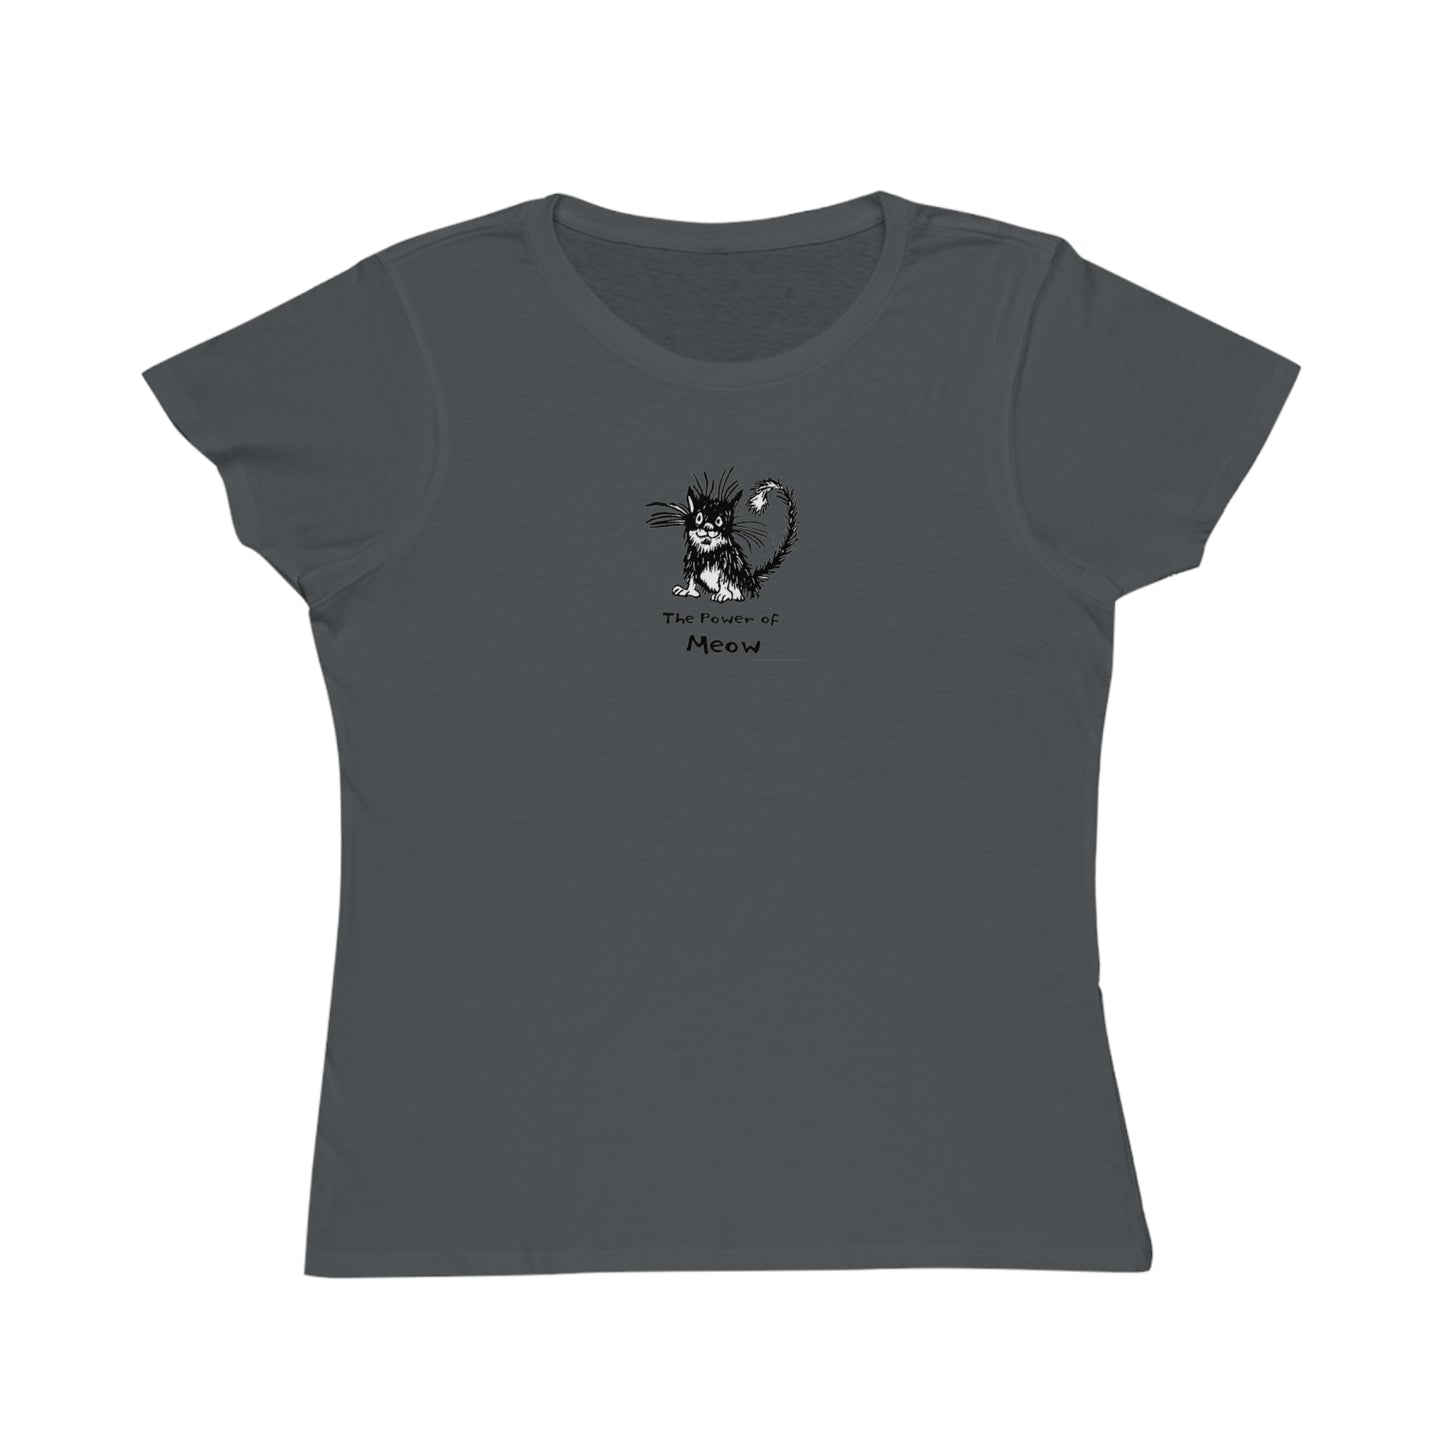 Black and white cat sitting on charcoal color women's t-shirt. Text under reads The Power of Meow